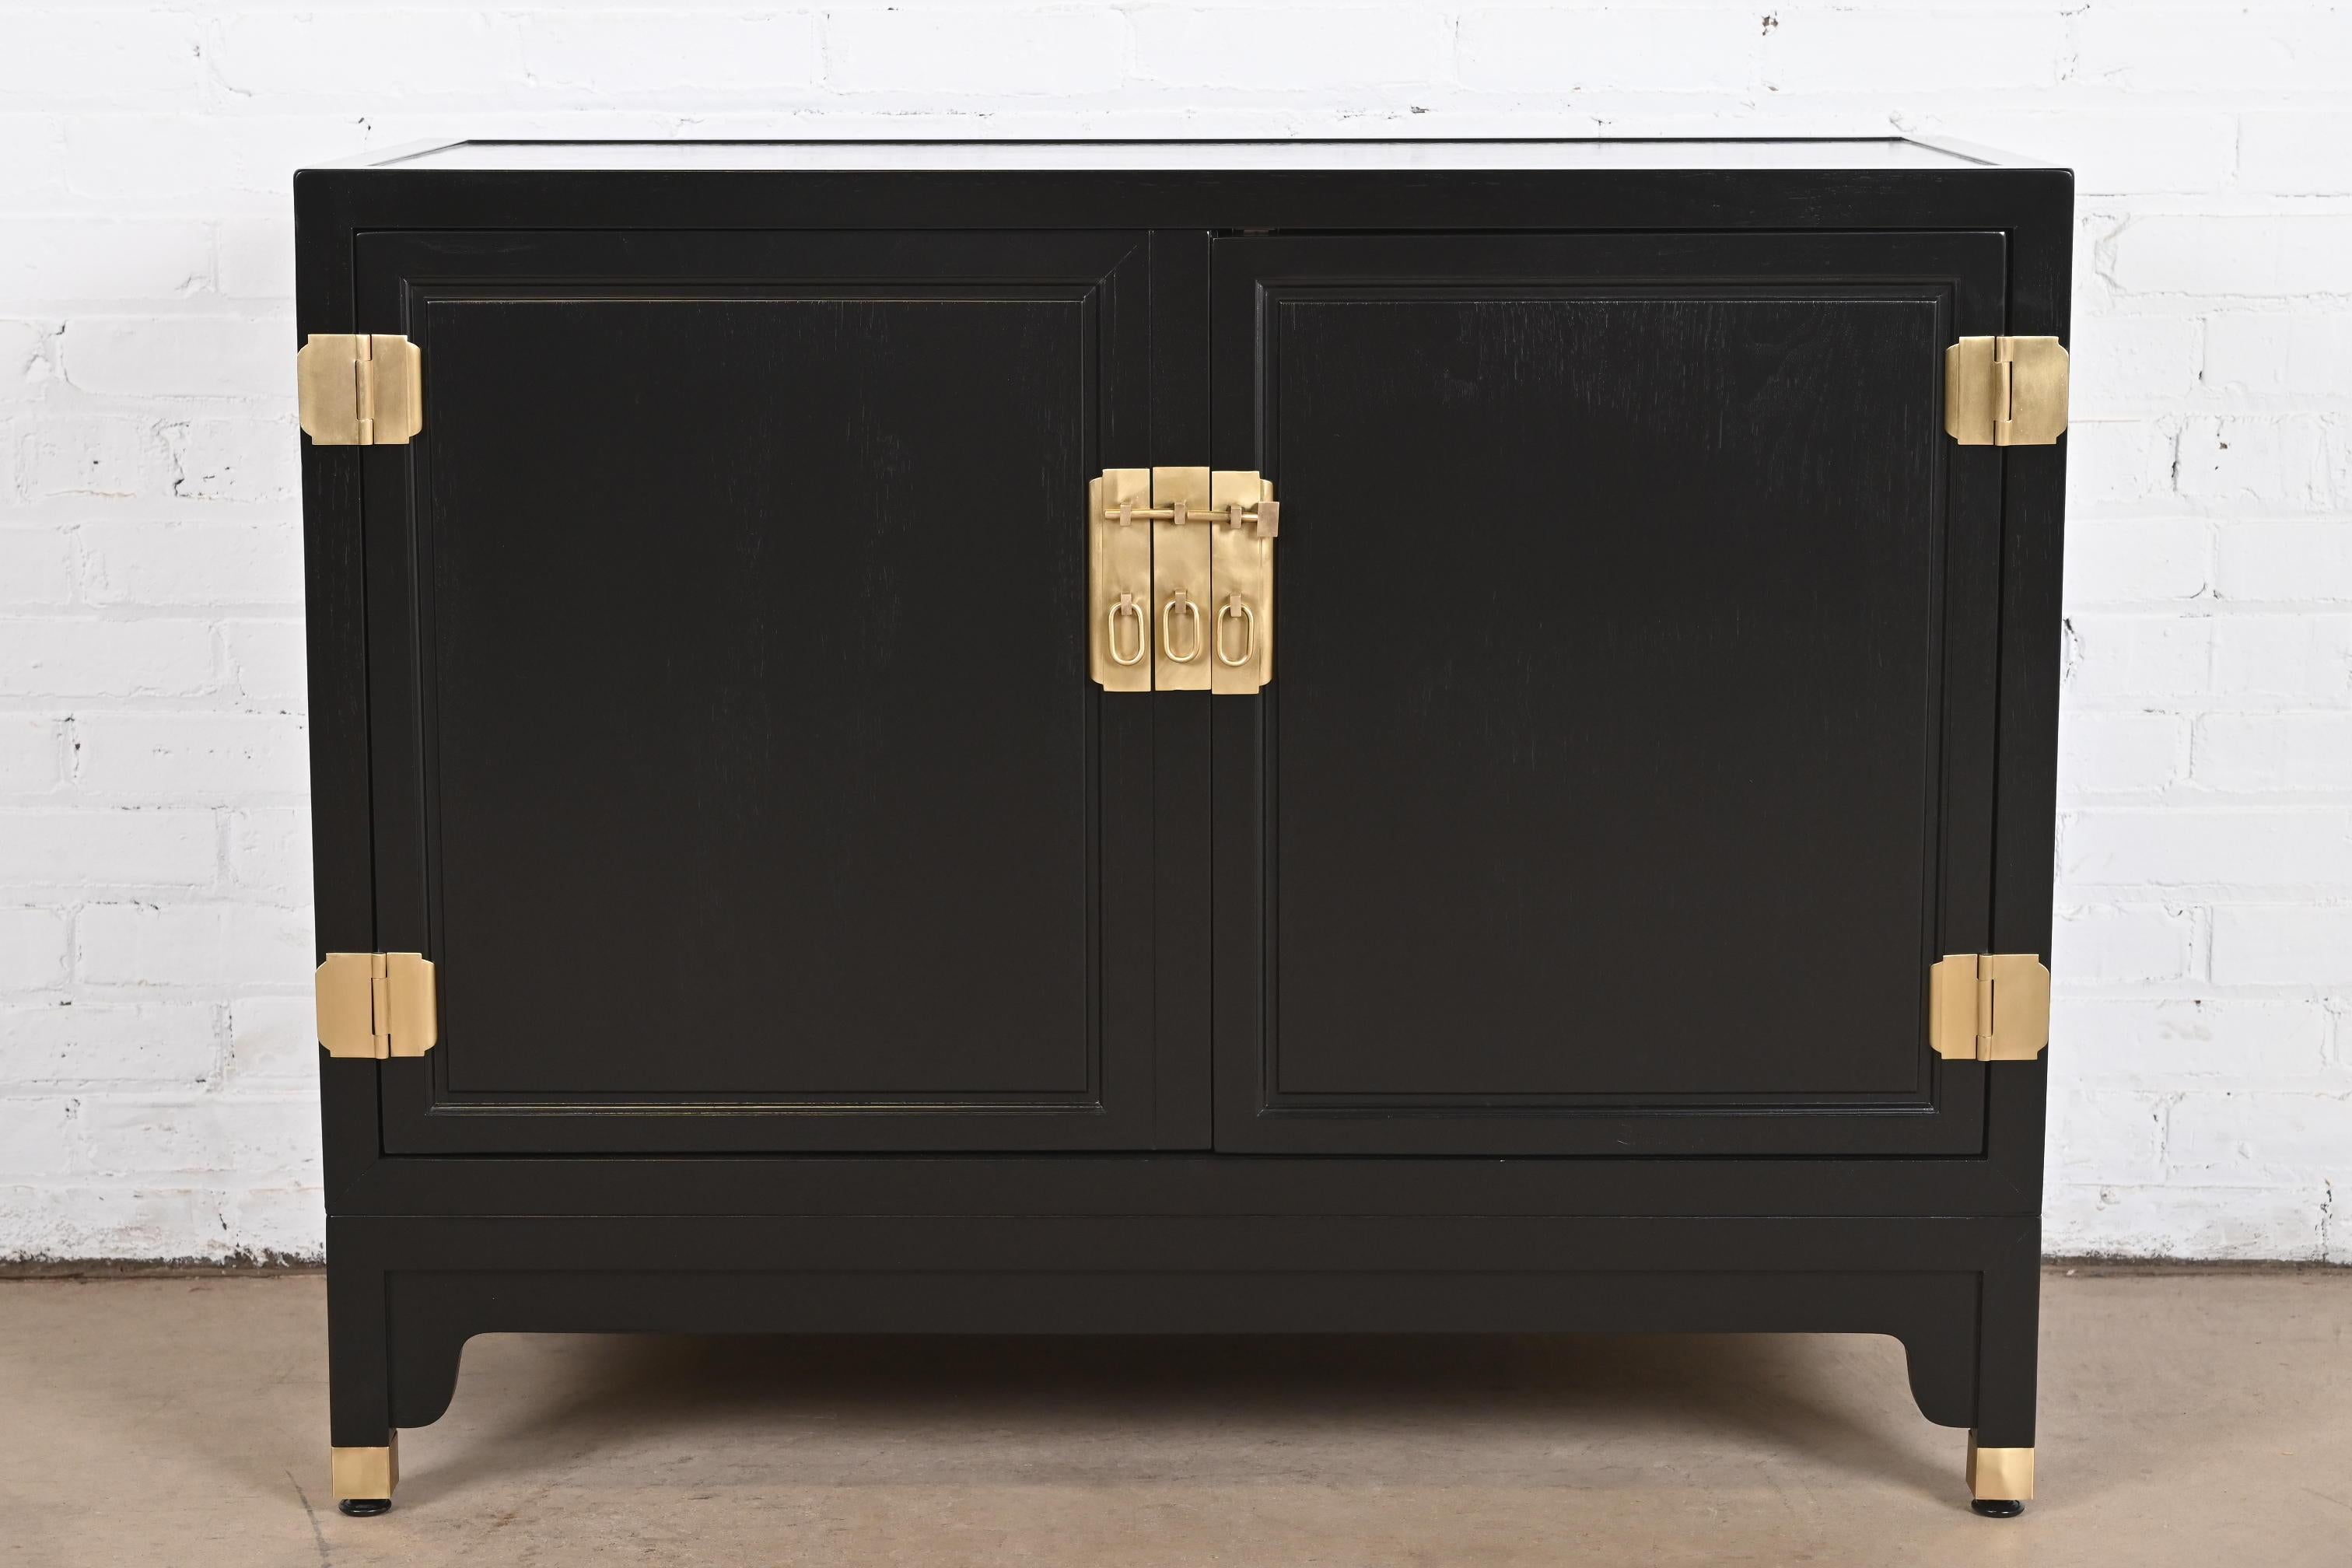 An exceptional mid-century modern Hollywood Regency Chinoiserie credenza, sideboard buffet, or bar cabinet

By Michael Taylor for Baker Furniture, 